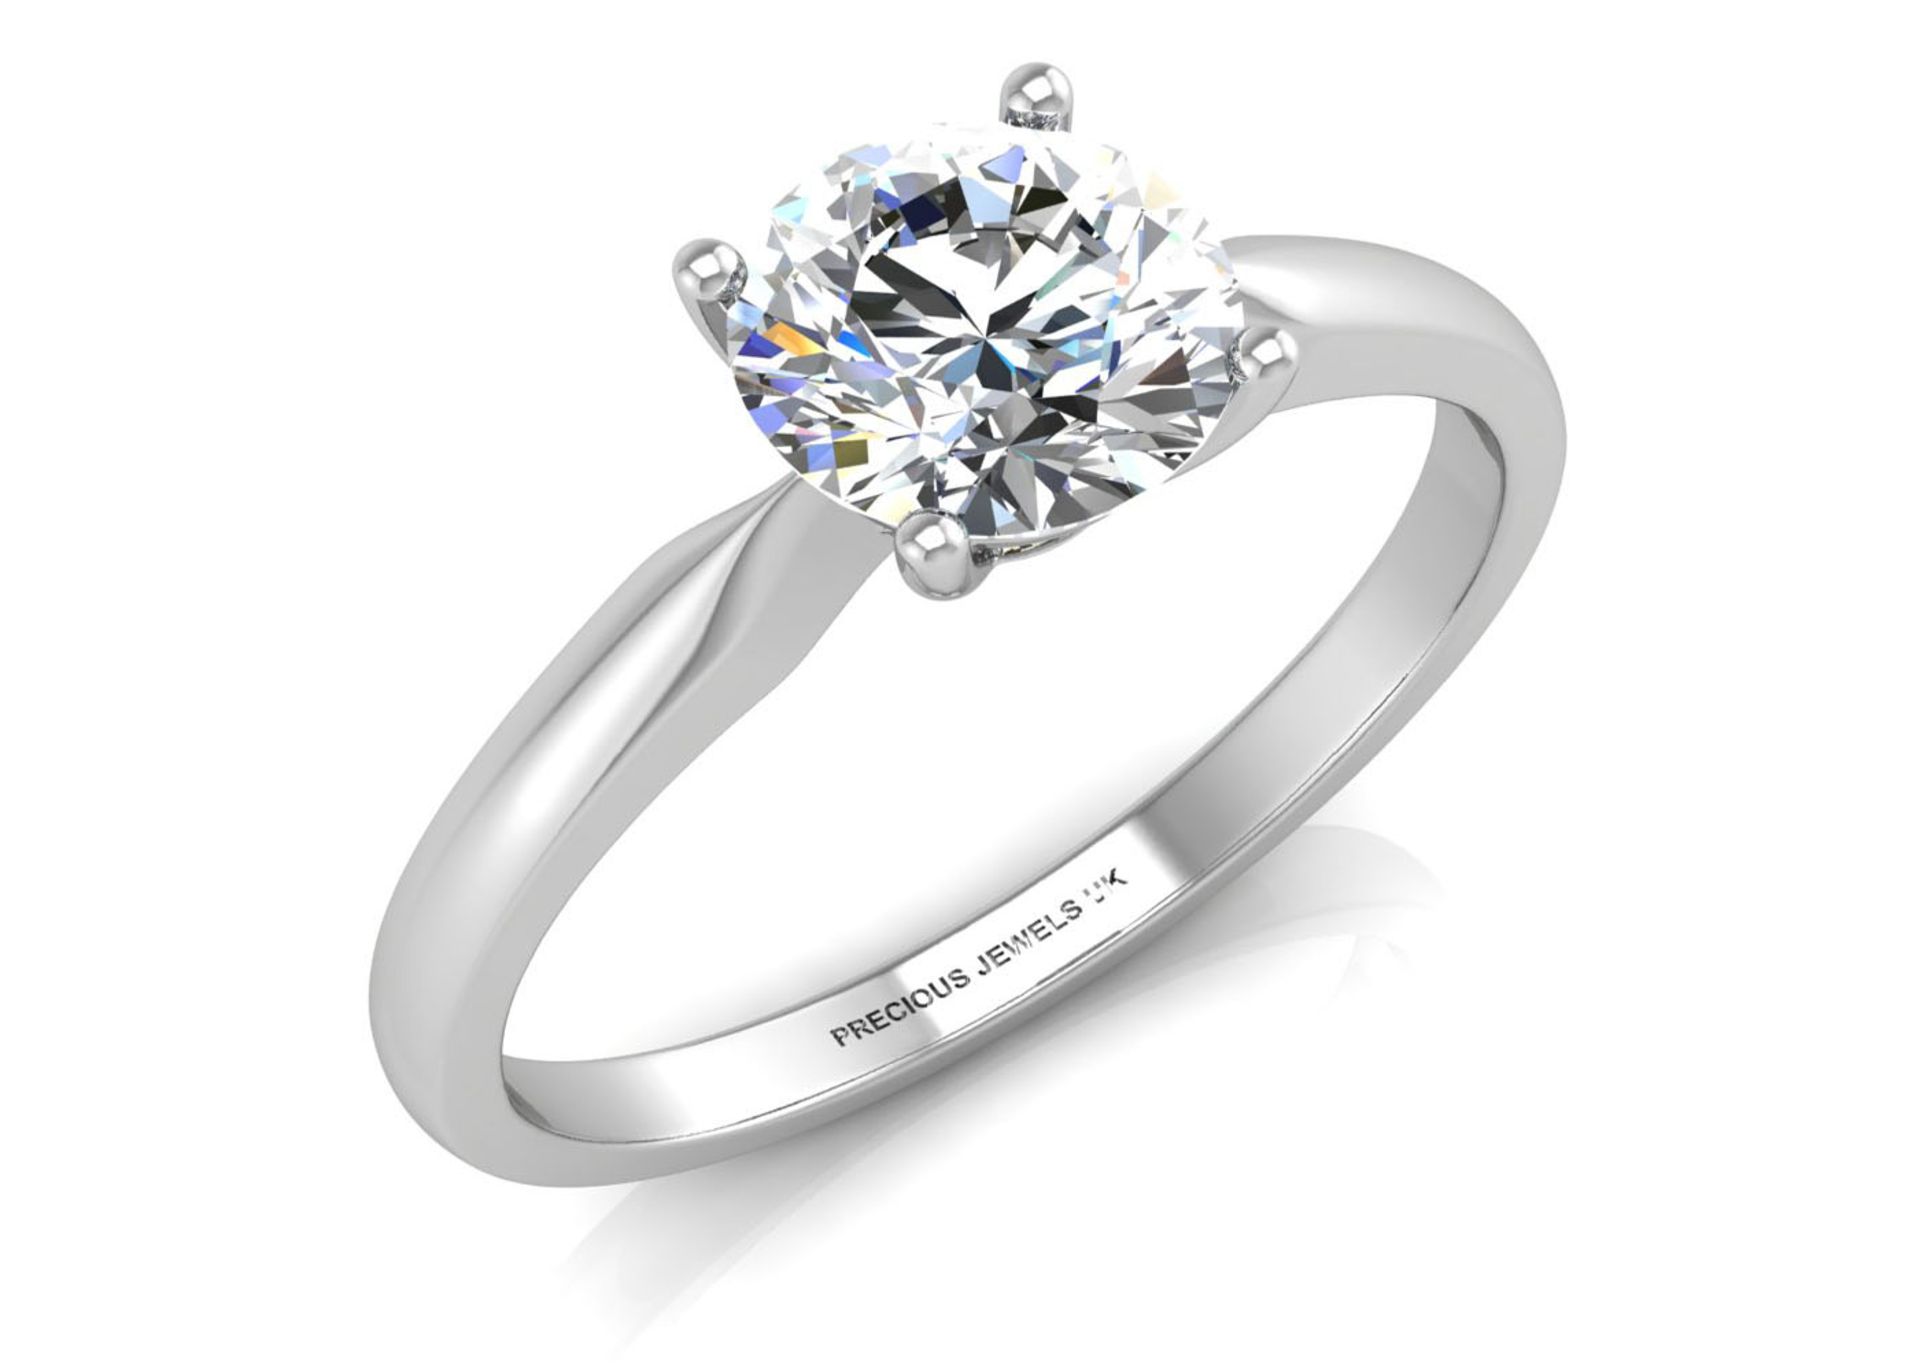 Valued by AGI £8,955.00 - 18ct White Gold Single Stone Diamond Enagagement Ring D IF 0.50 Carats -